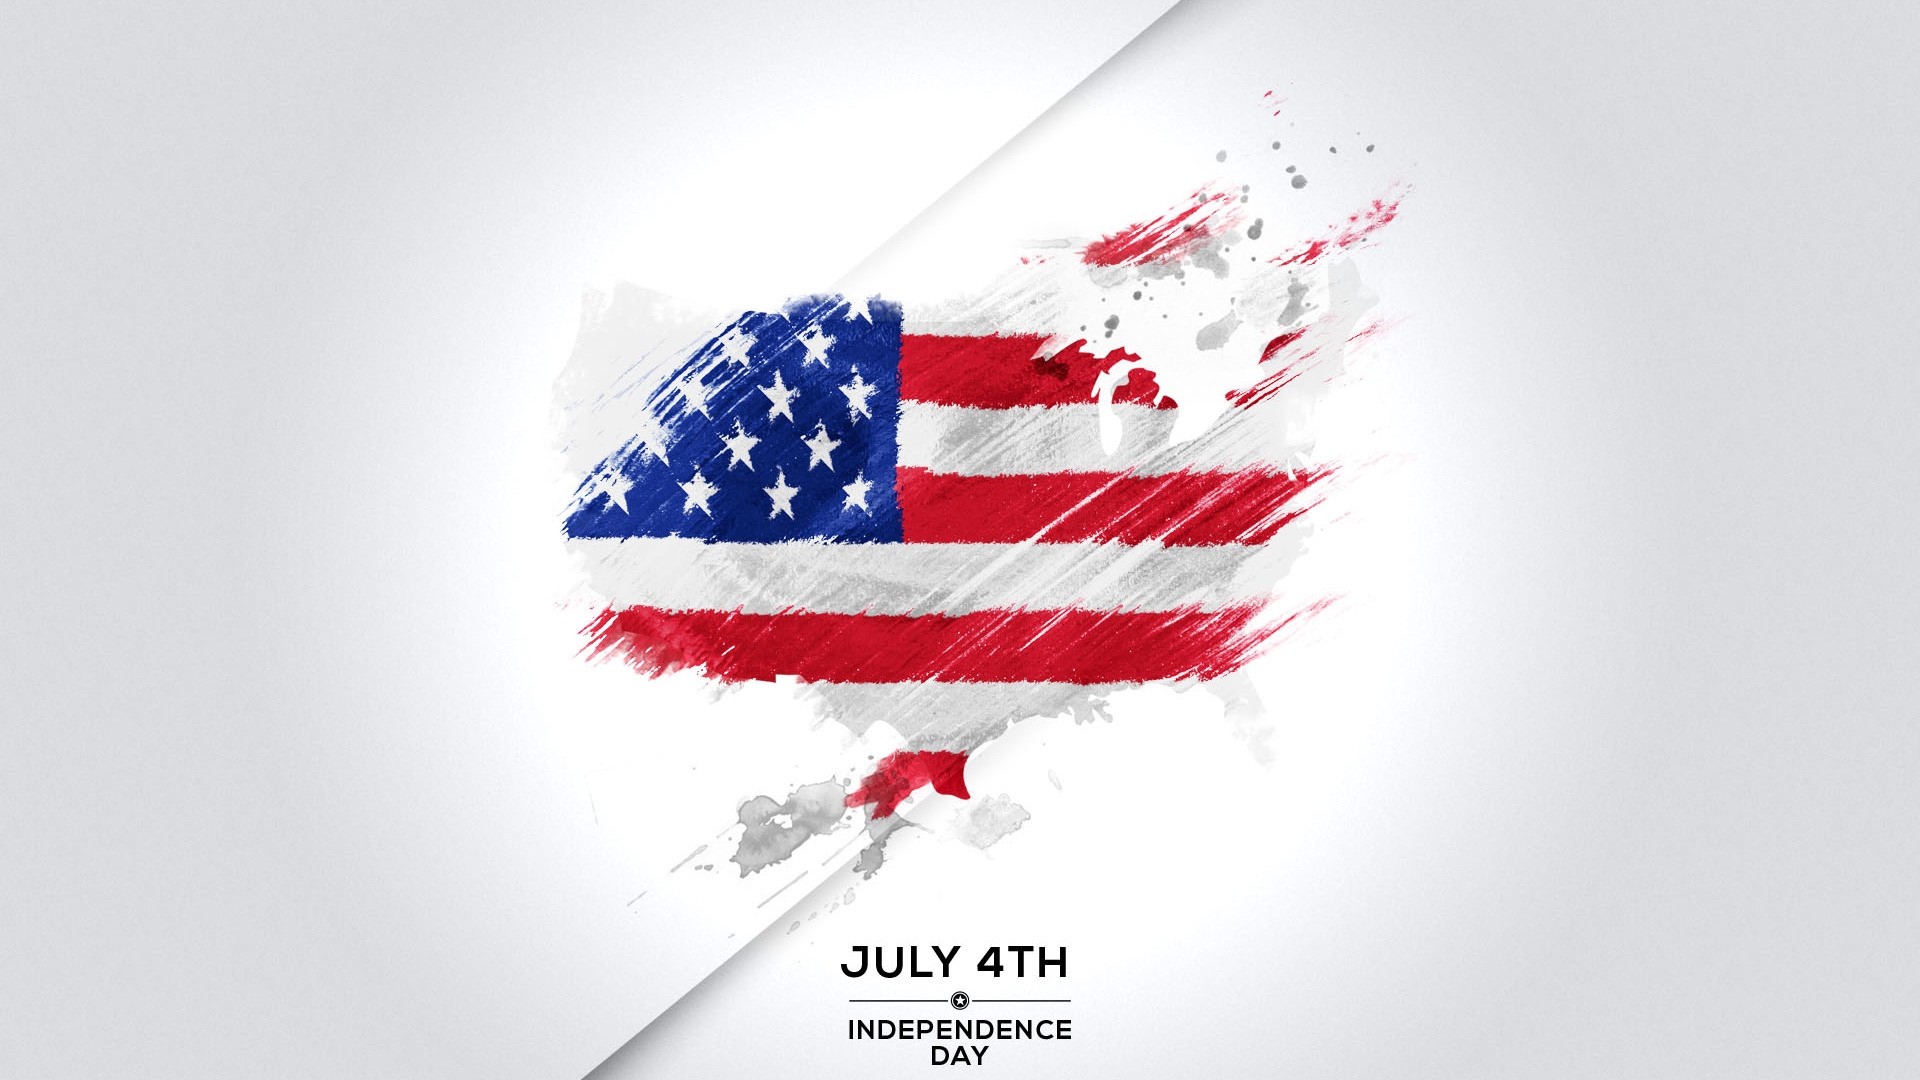 July 4th Minimal for 1920 x 1080 HDTV 1080p resolution